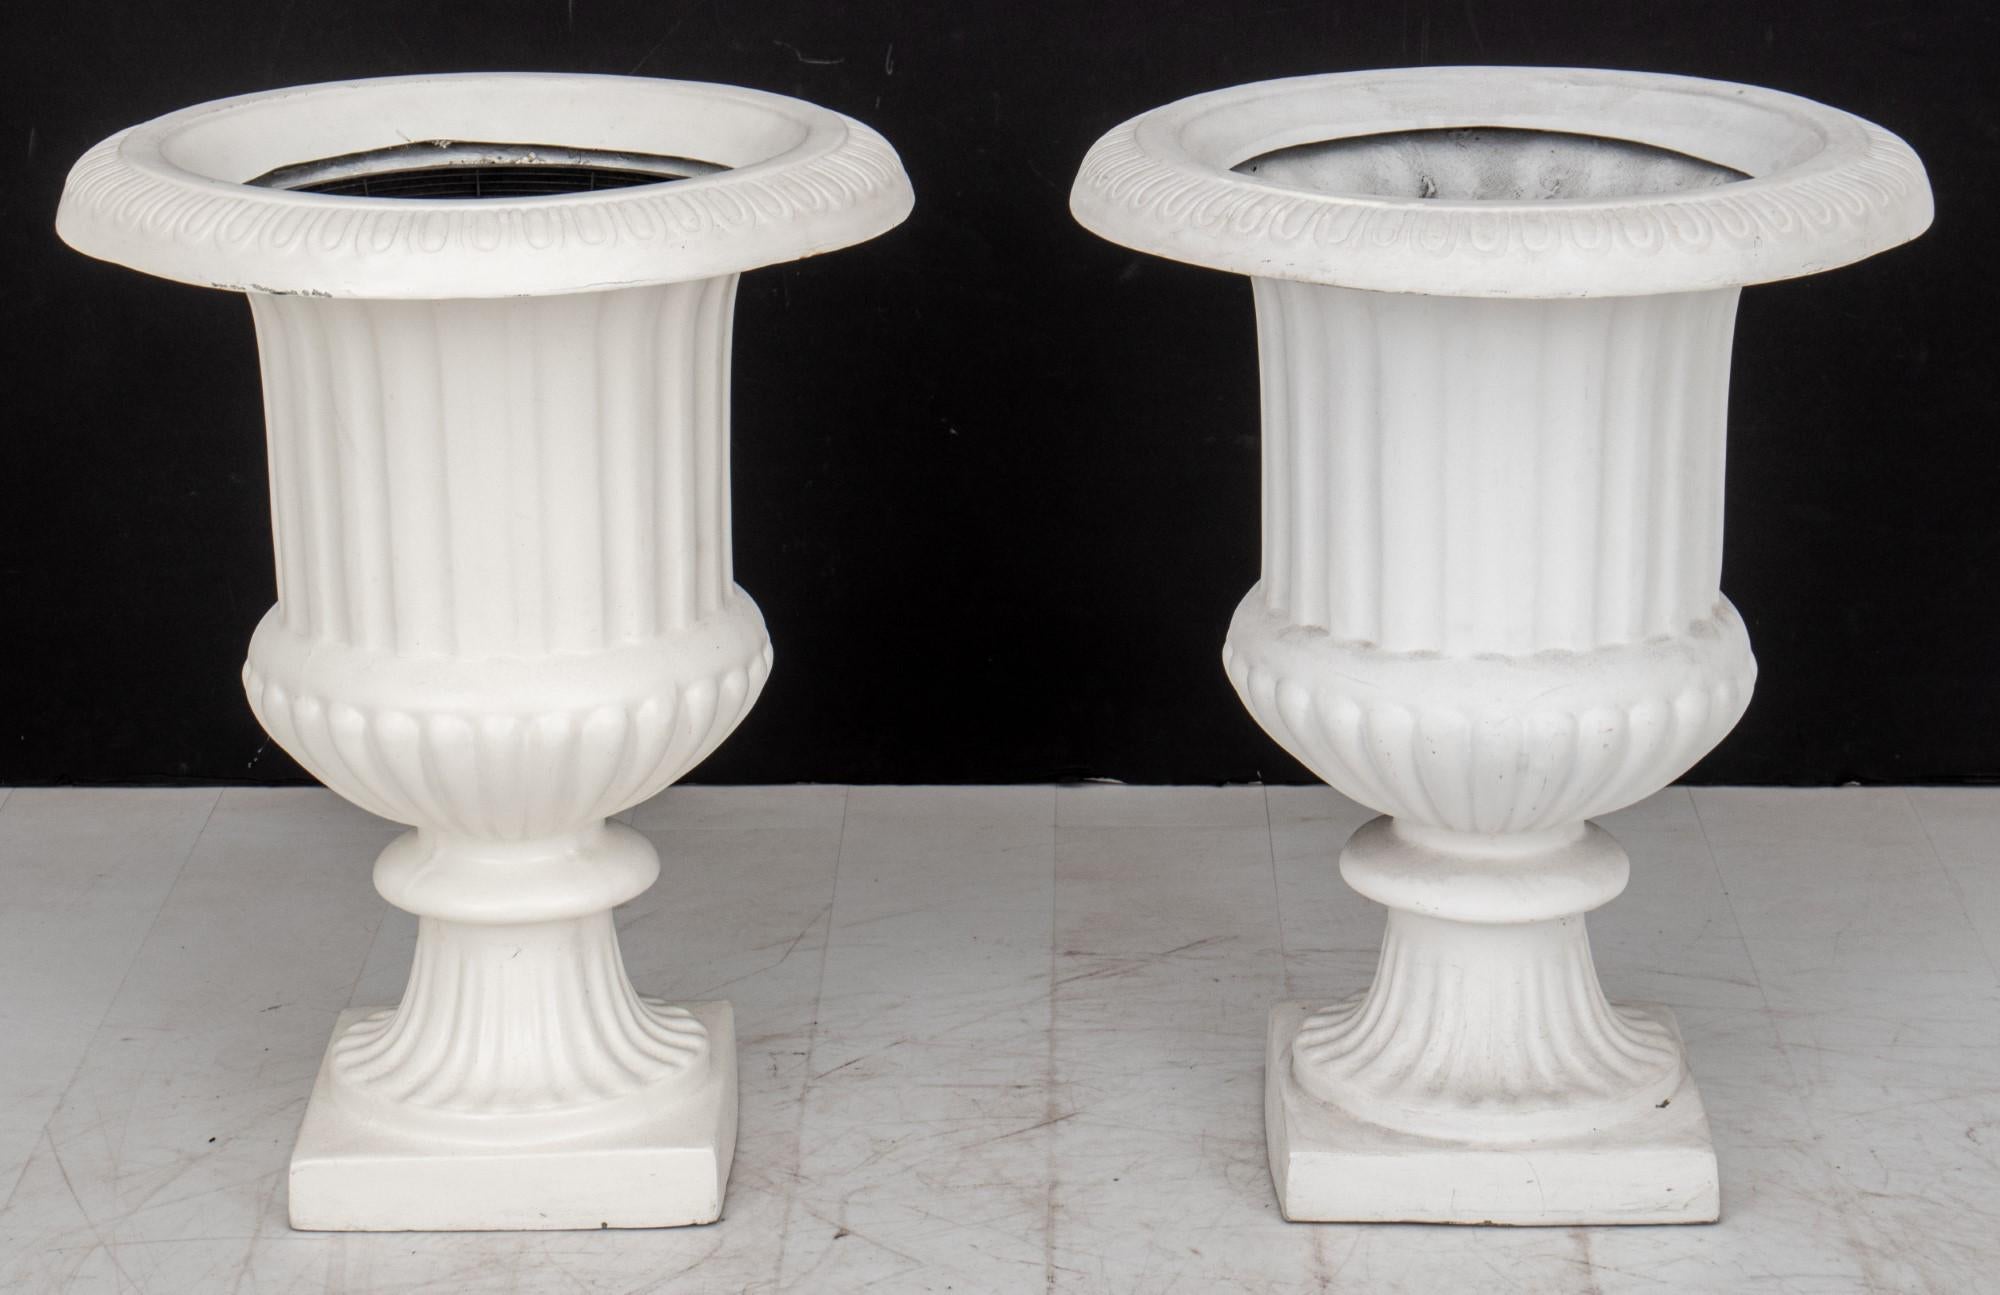 Pair of Neoclassical Style White Composite Urn Form Planters

Design: Neoclassical style urn form planters.

Dimensions: 29